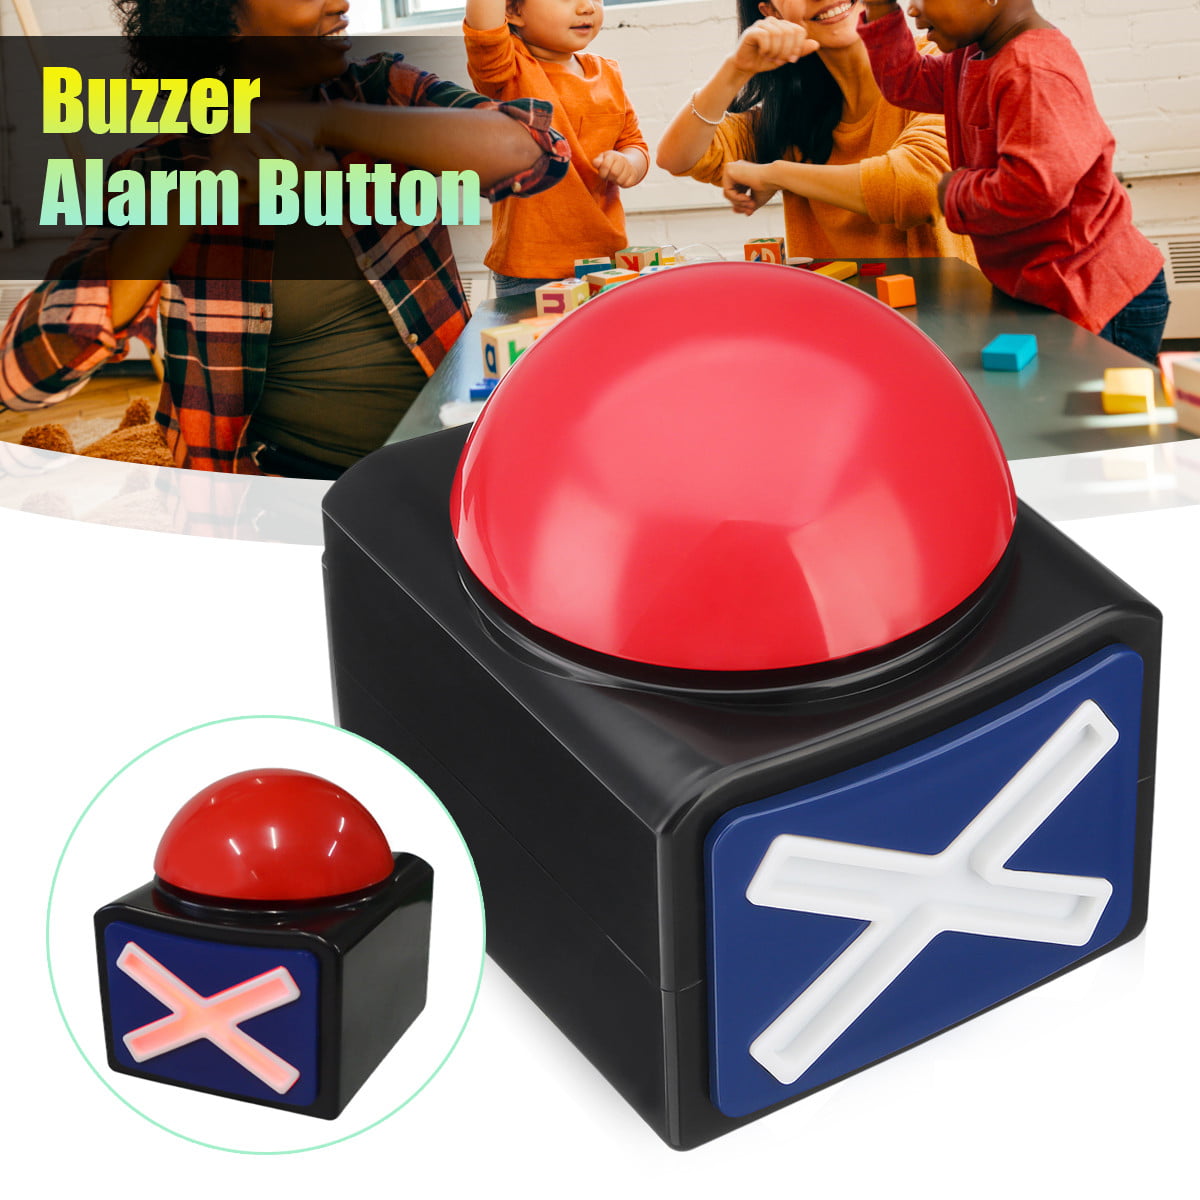 Judge Right or Wrong Game Answer Button Answer Buzzers Sound Buttons,Set of 2 Assorted Colored Buzzers,Used for Game Interaction 